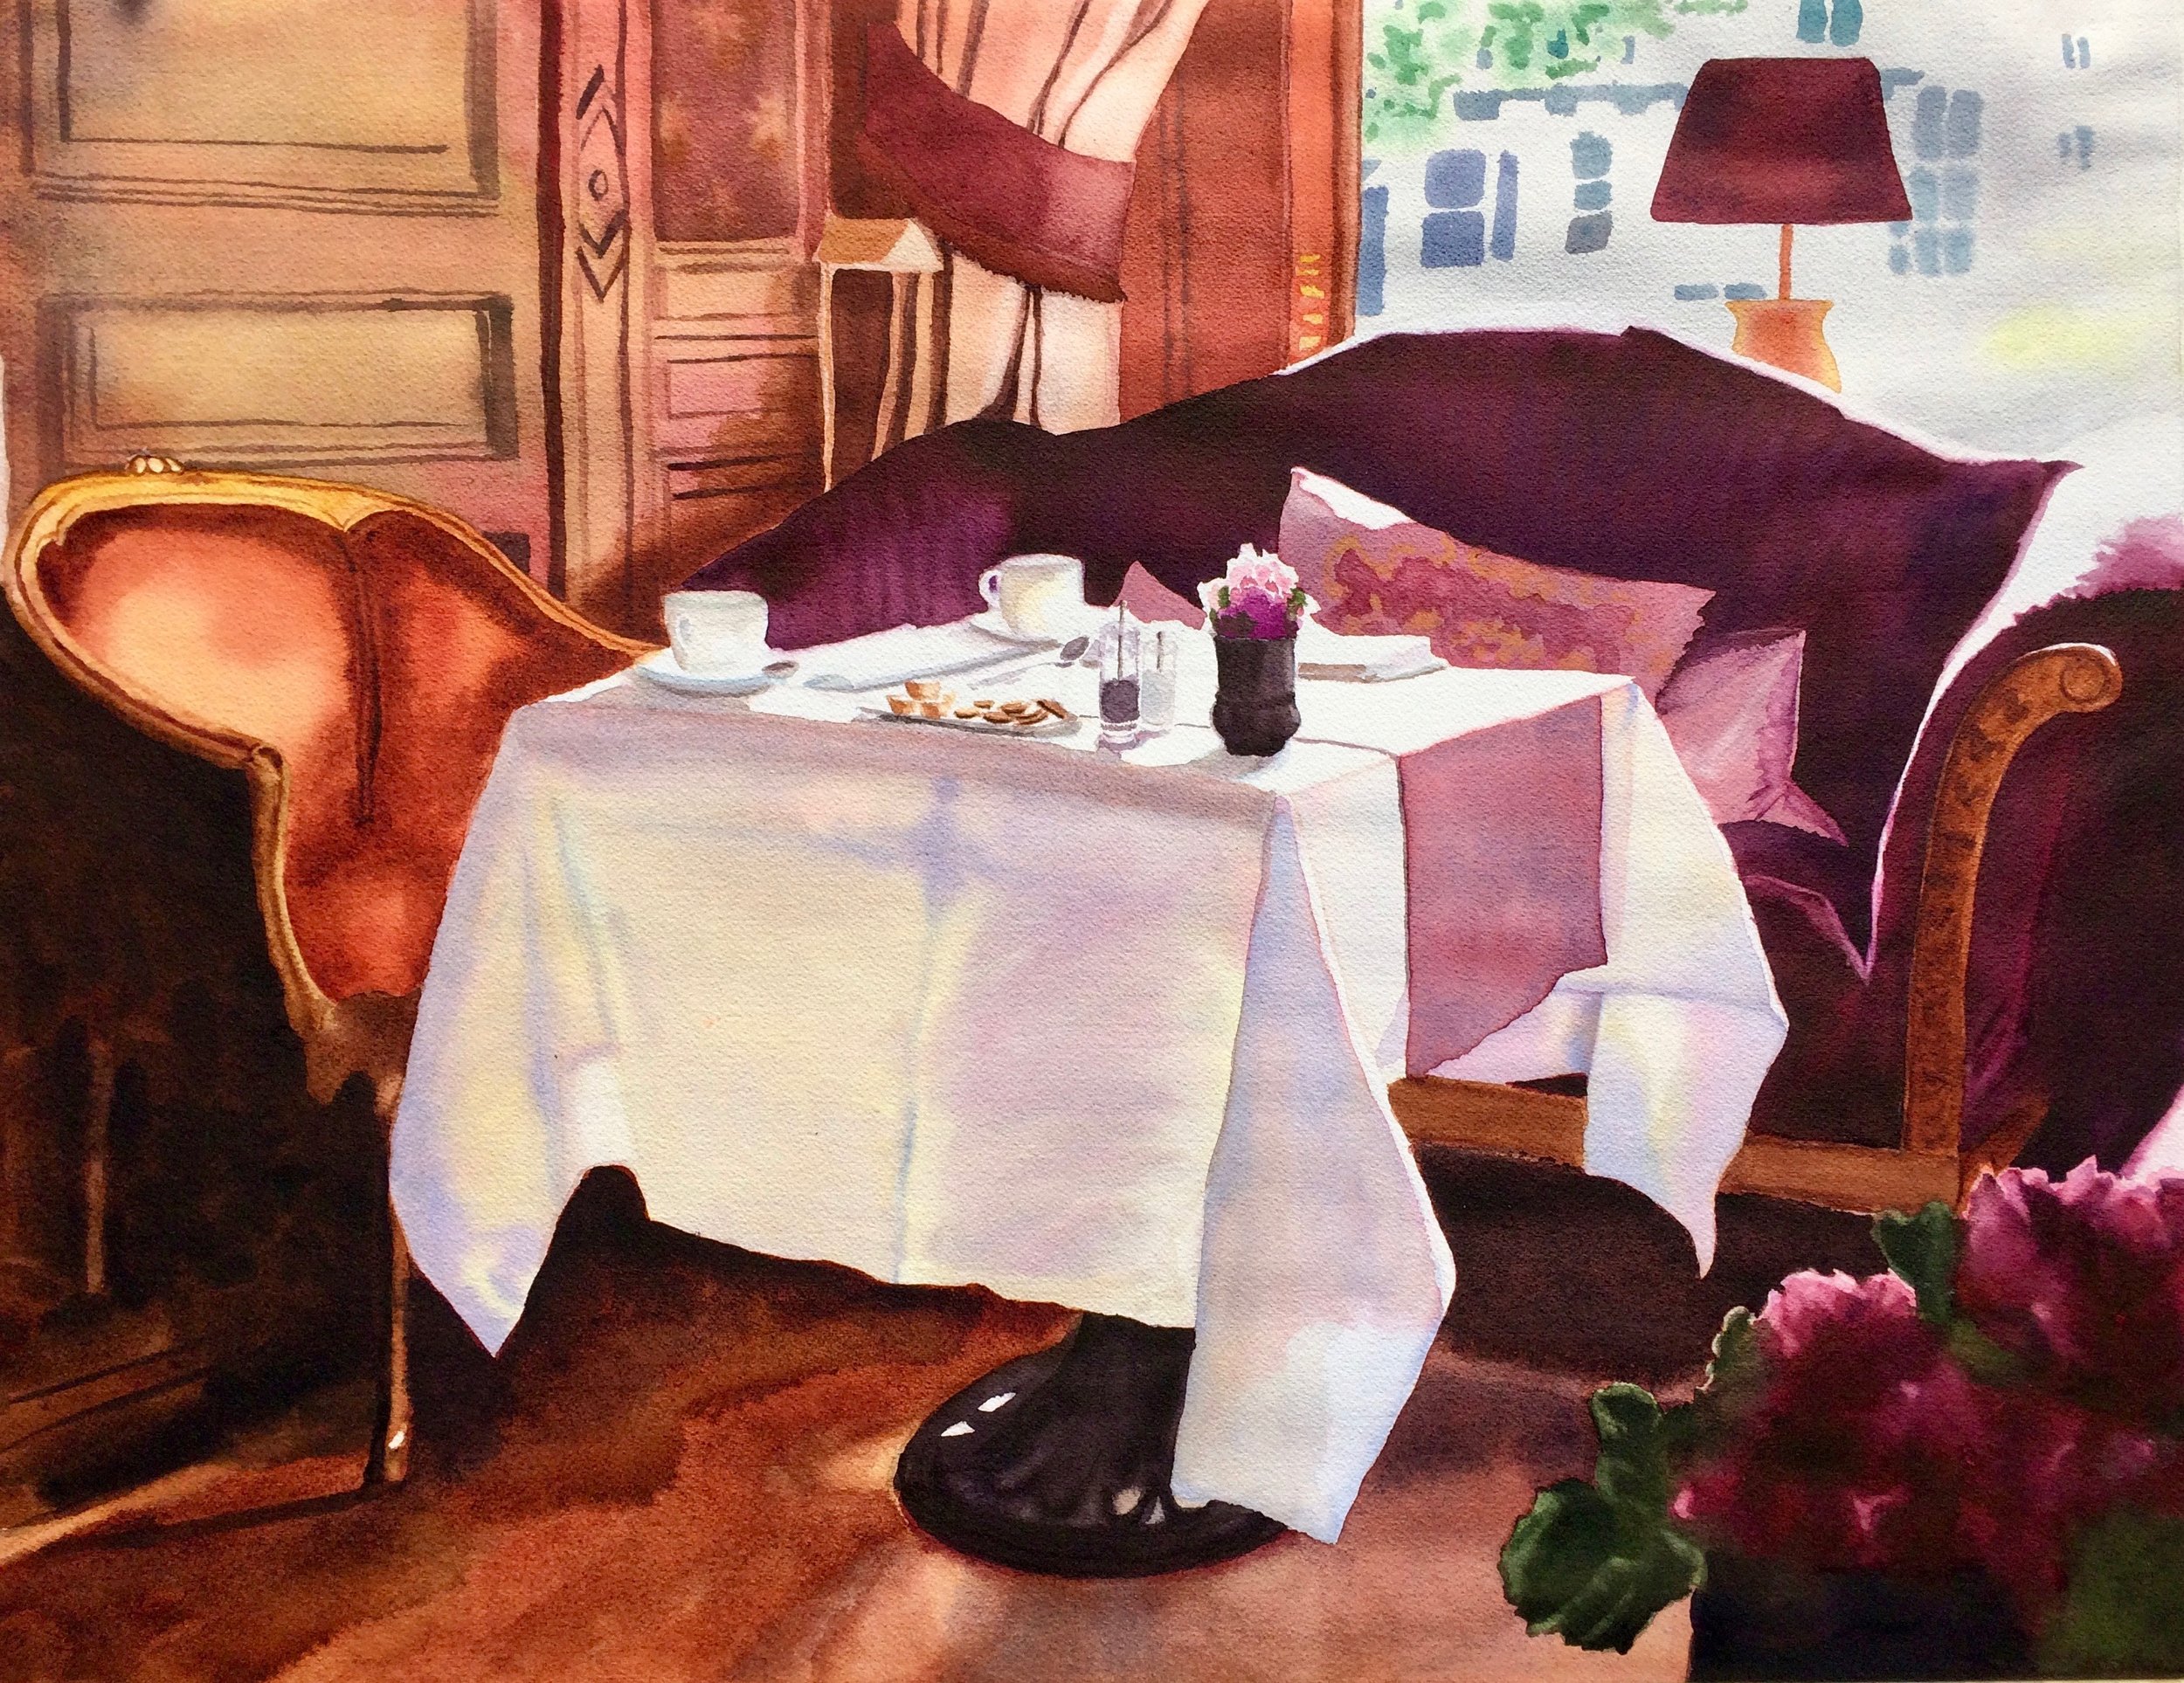 Breakfast at the Hotel, 29" x 19"